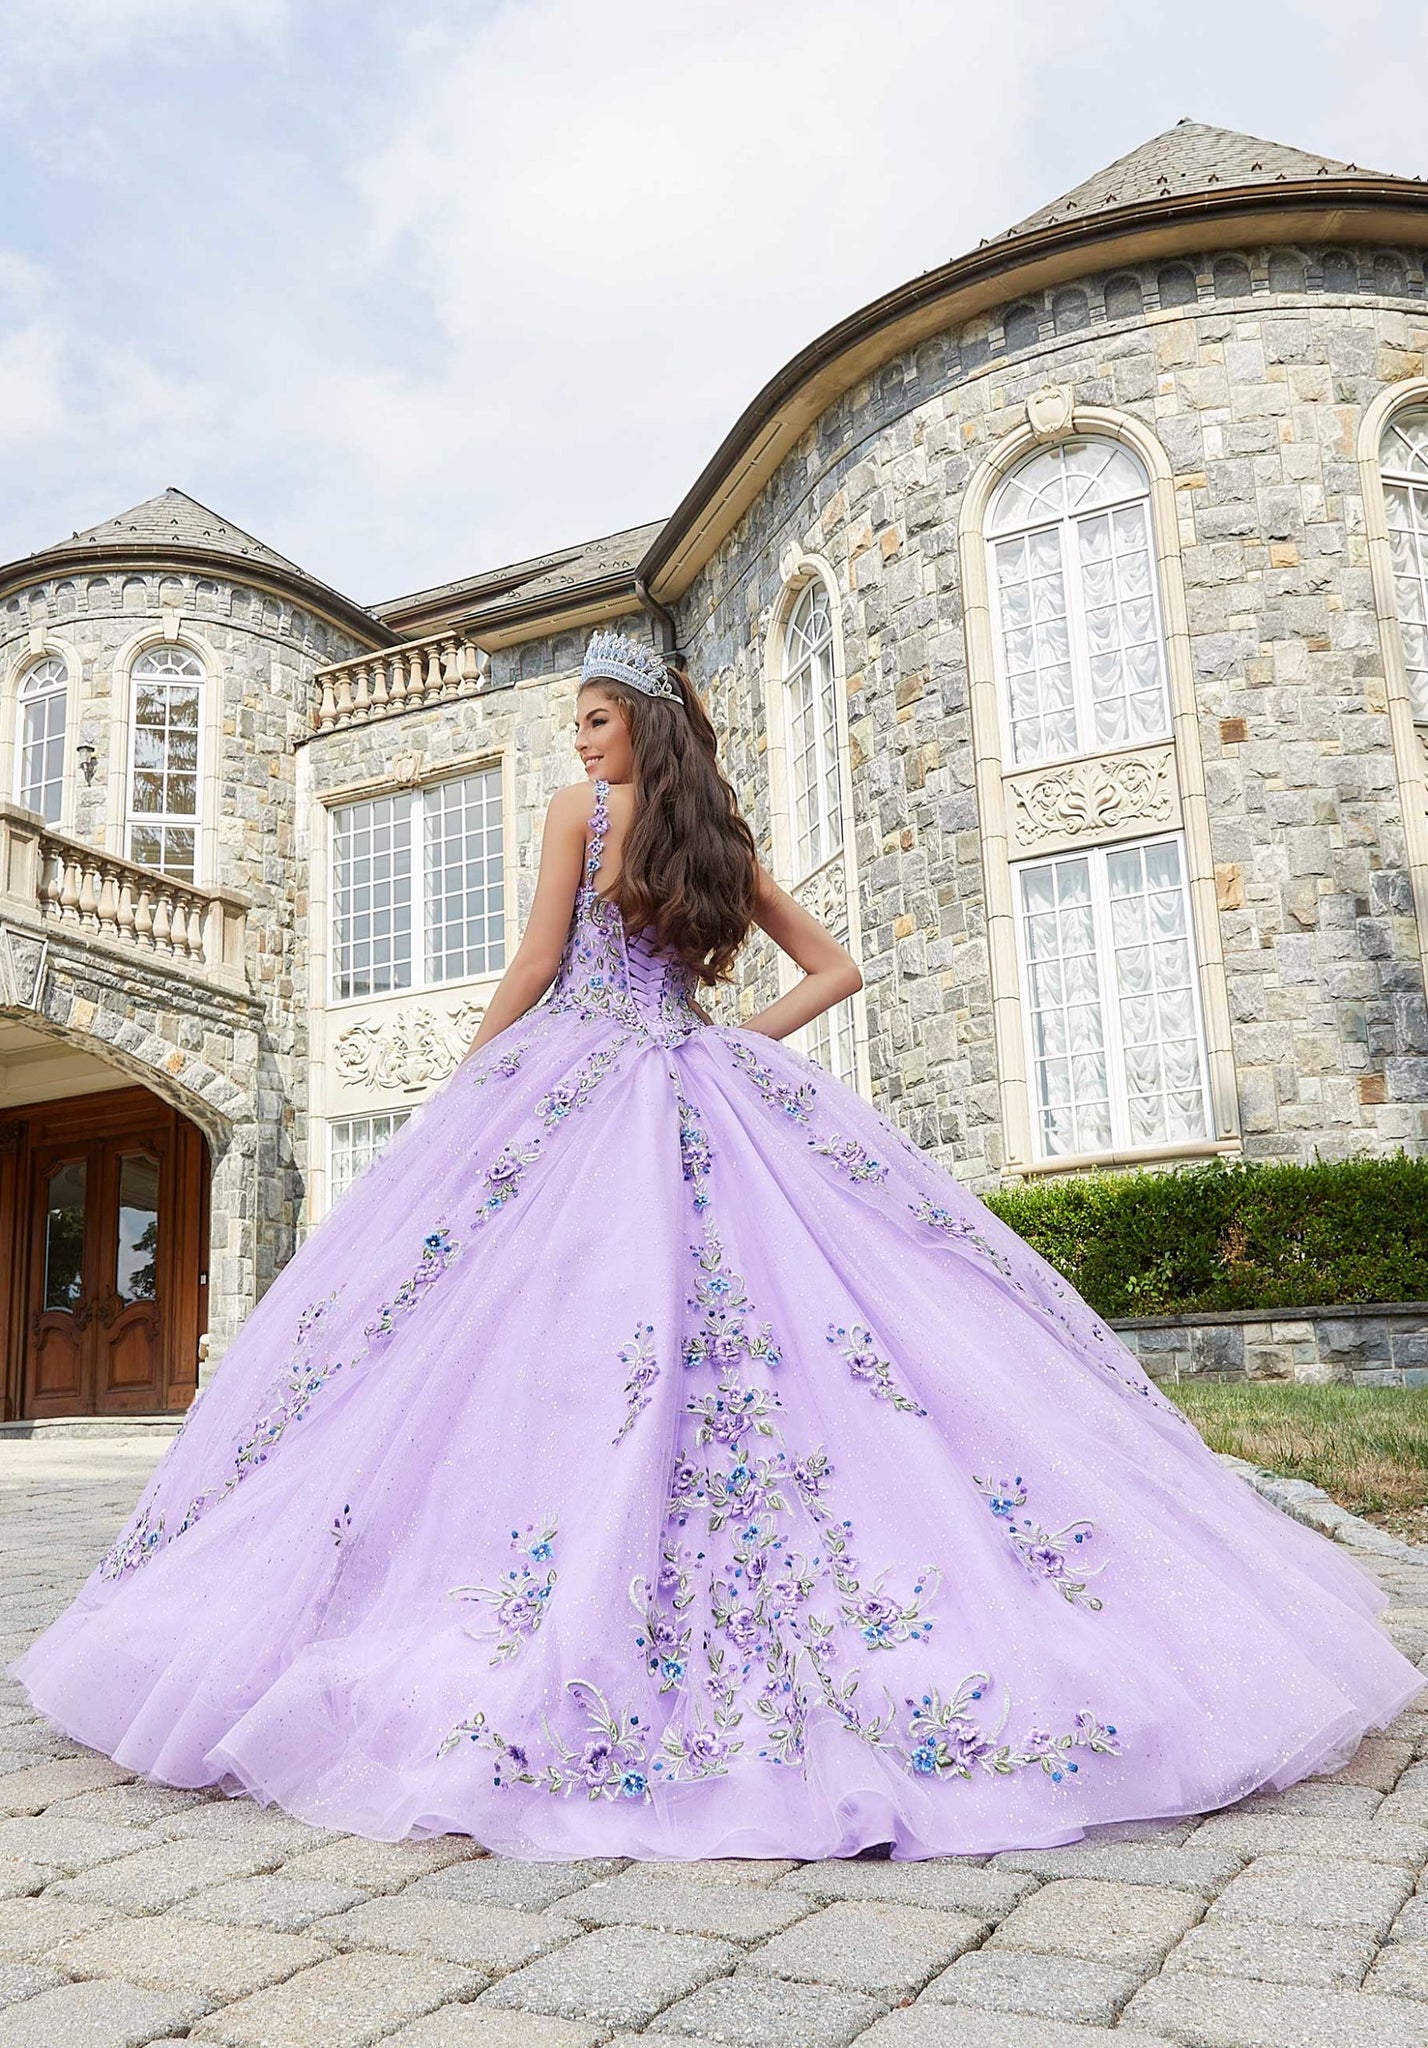 Crystal Beaded Contrasting Floral Embroidered Quinceañera Dress